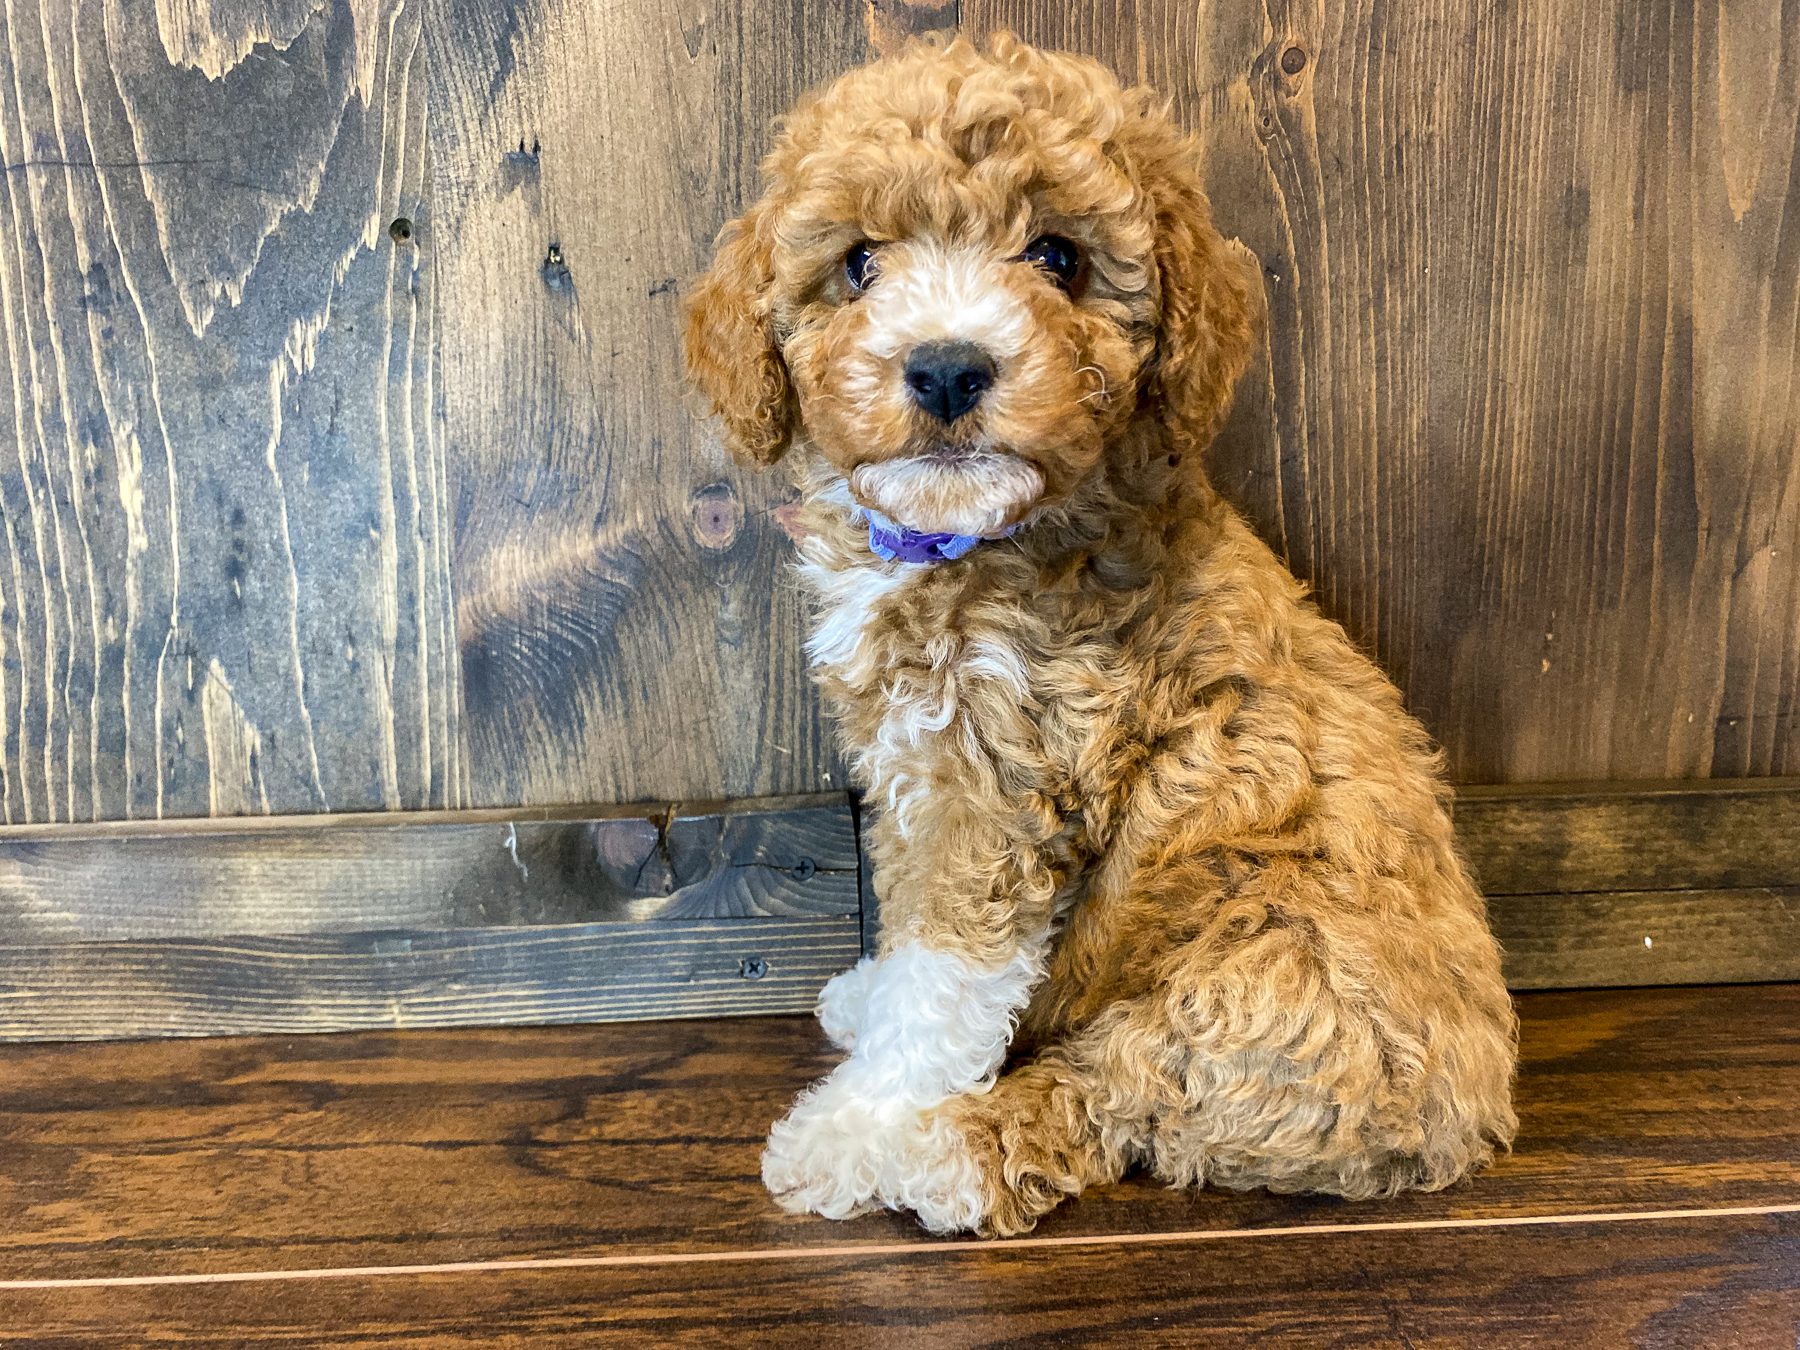 A litter of Petite Goldendoodles raised in Iowa by Poodles 2 Doodles